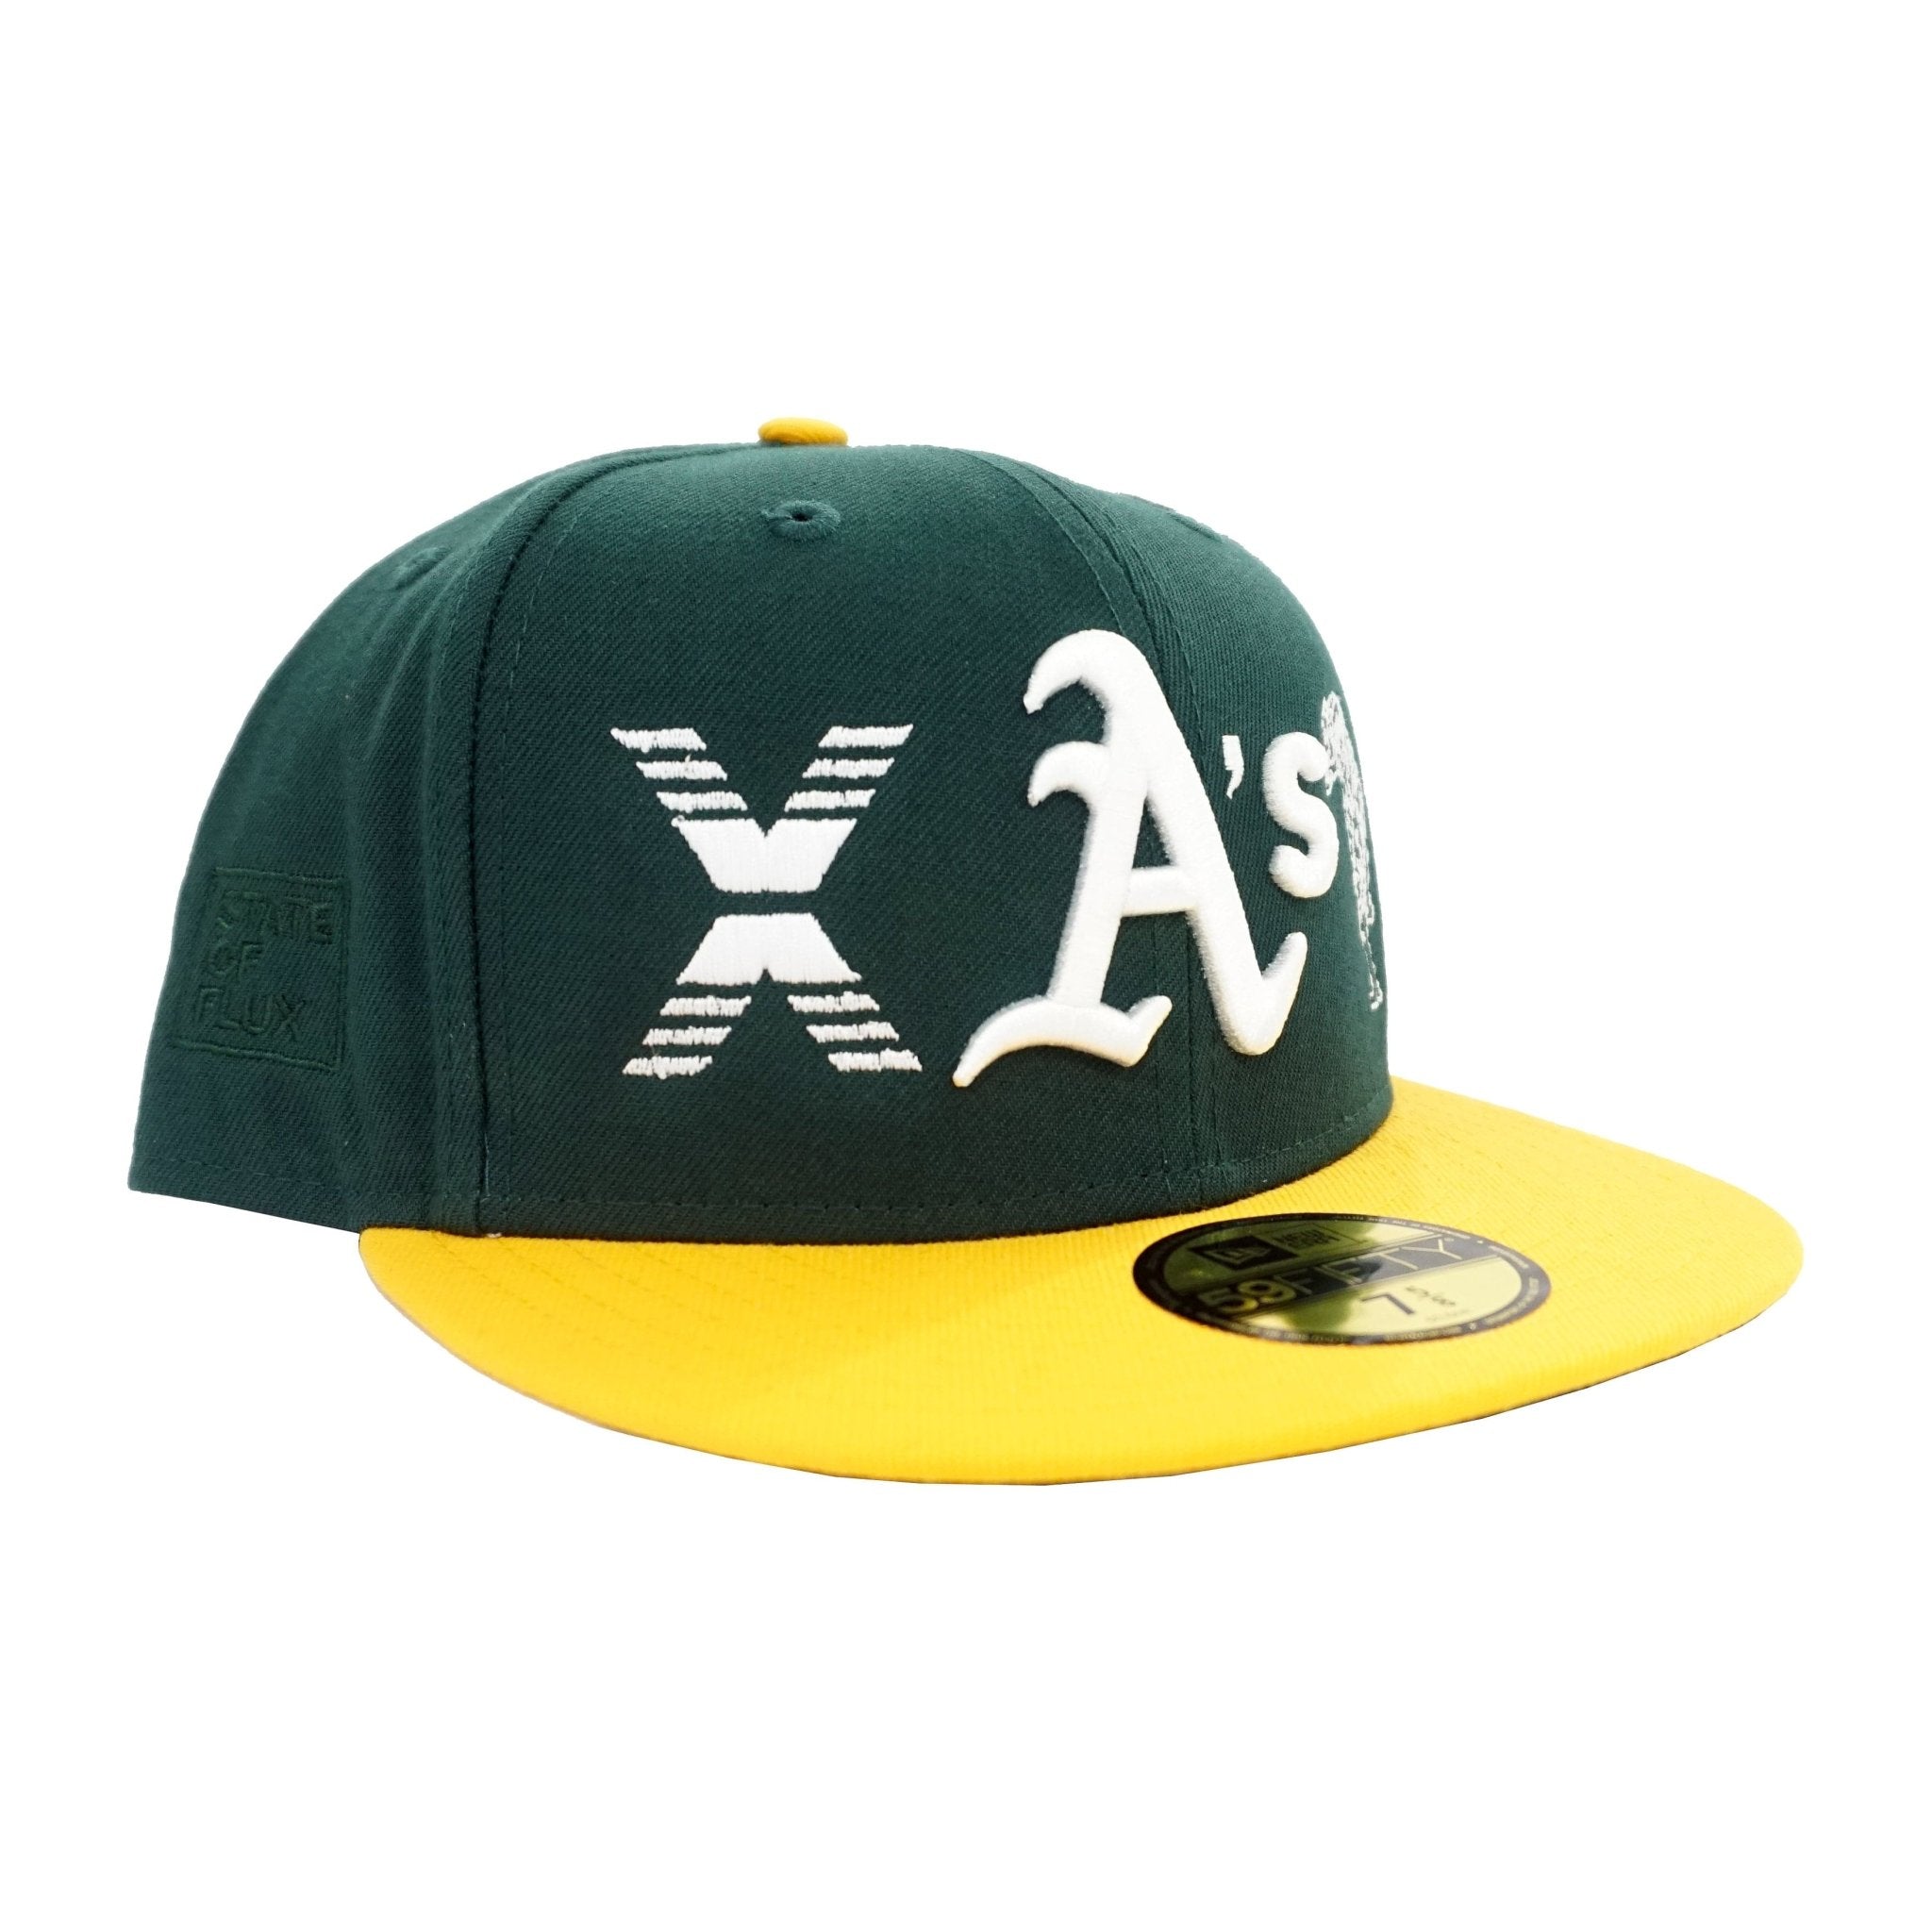 State Of Flux X New Era Oakland Athletics 59Fifty Fitted Hat in green and yellow - State Of Flux - State Of Flux